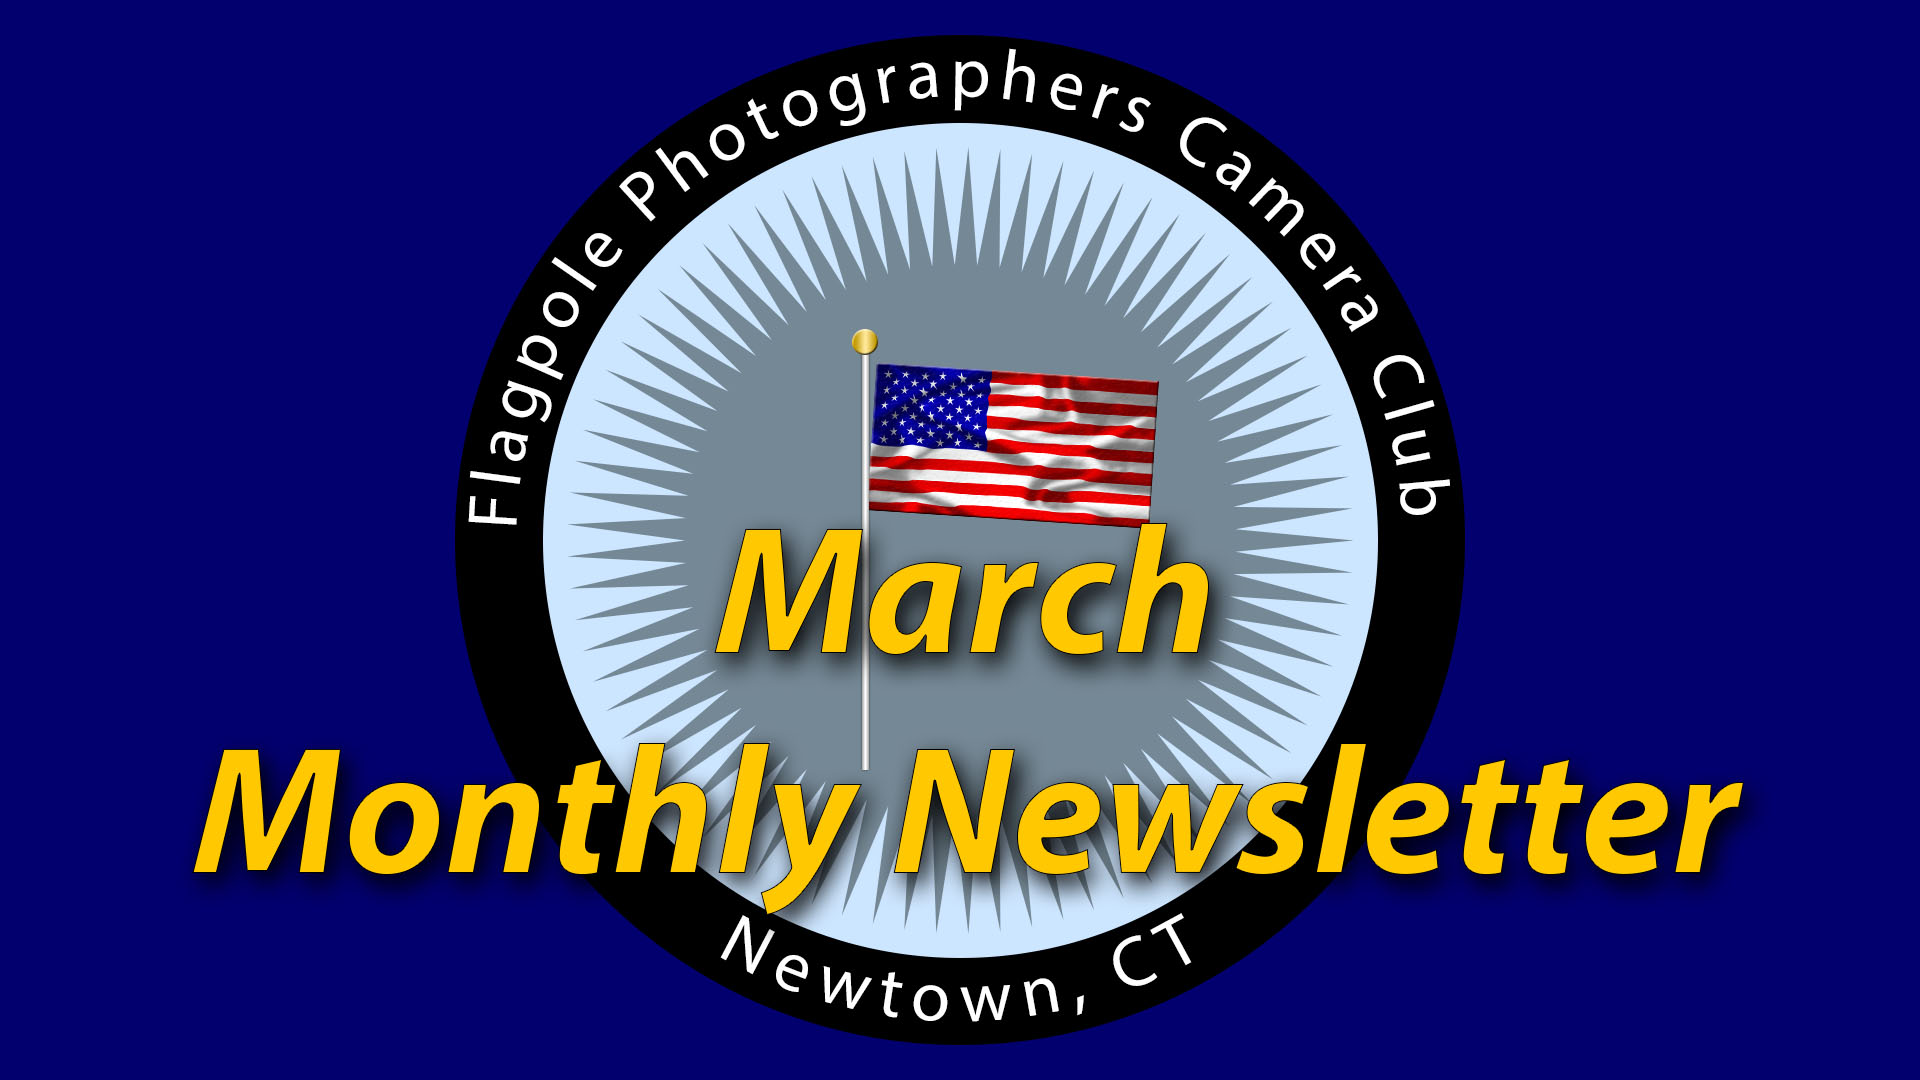 Flagpole Photographers March 2021 Newsletter